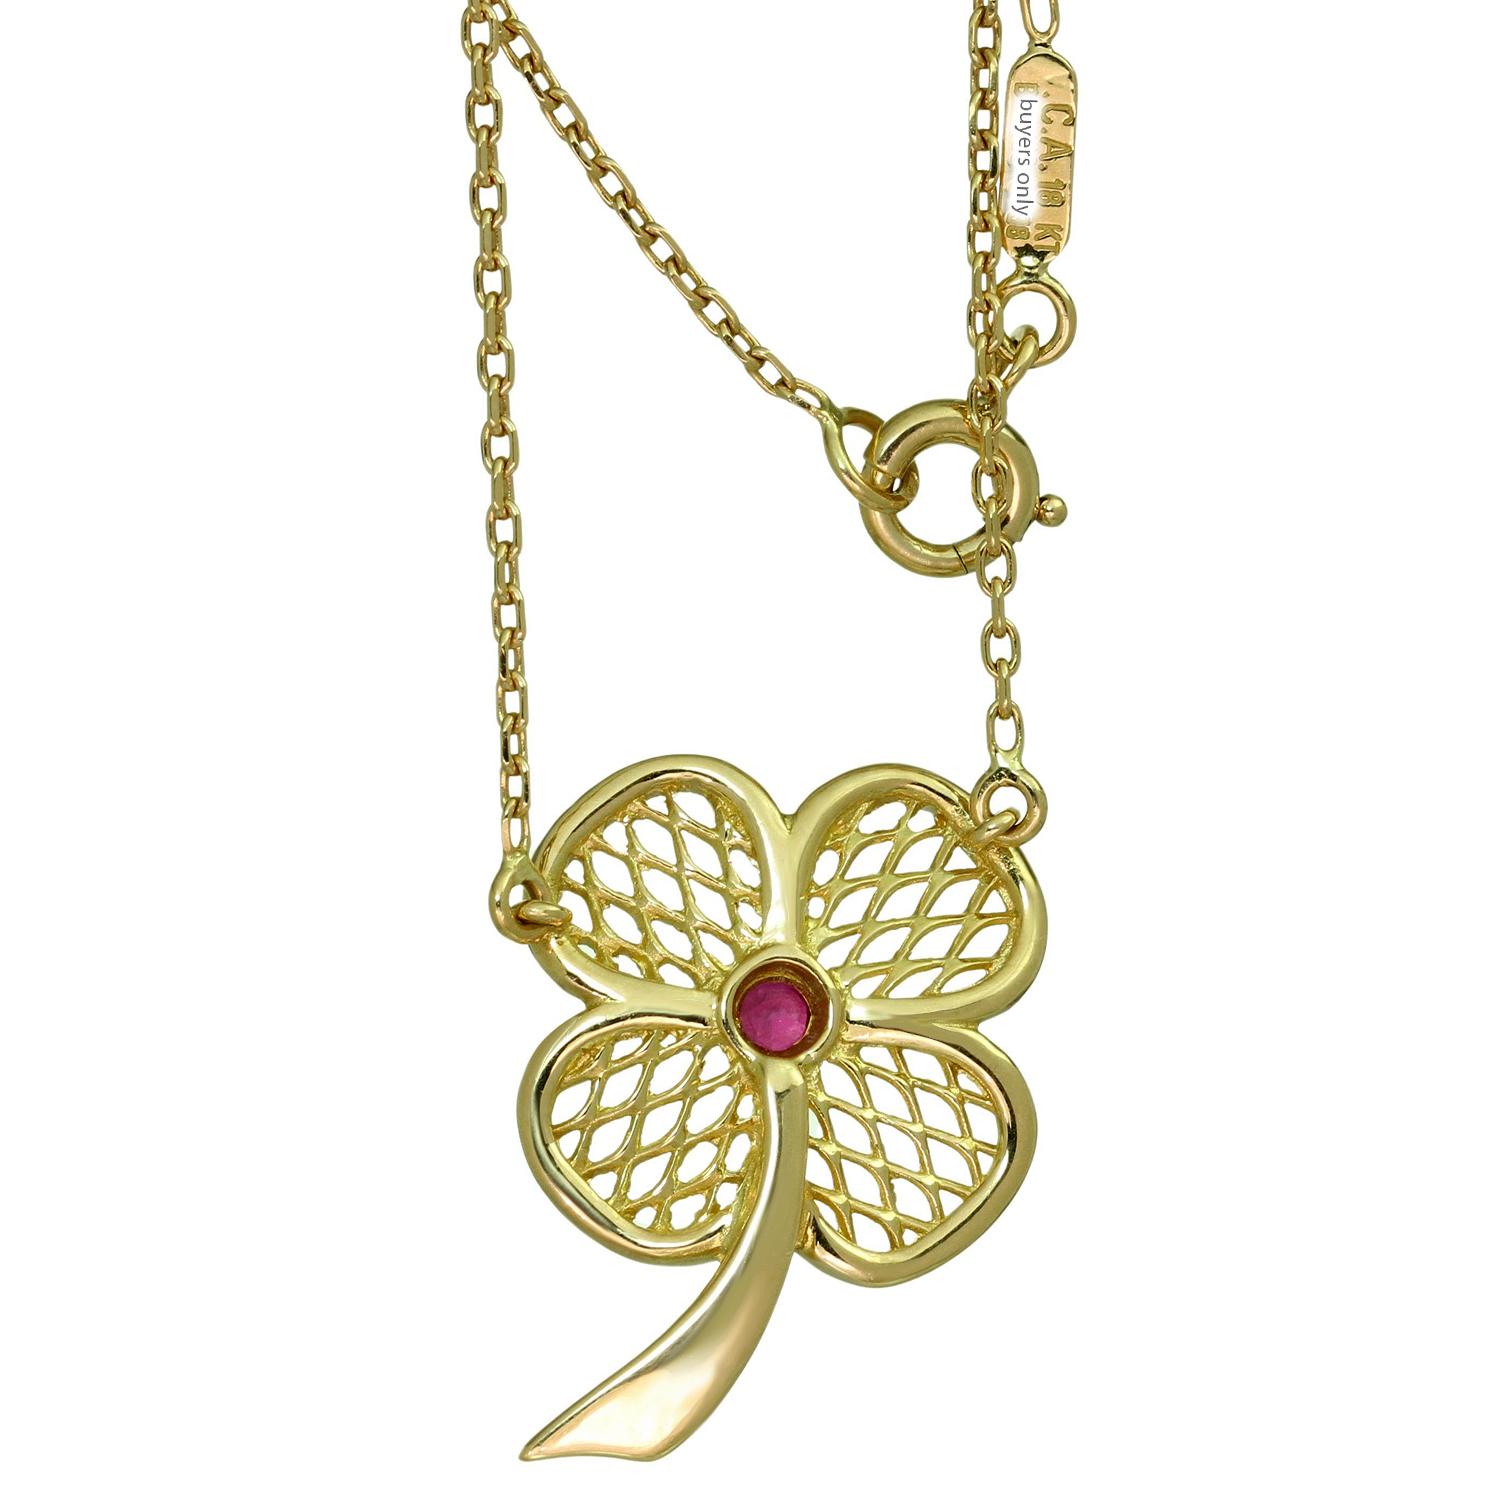 VAN CLEEF & ARPEL Ruby 18k Yellow Gold Flower Lattice Pendant Necklace In Excellent Condition For Sale In New York, NY